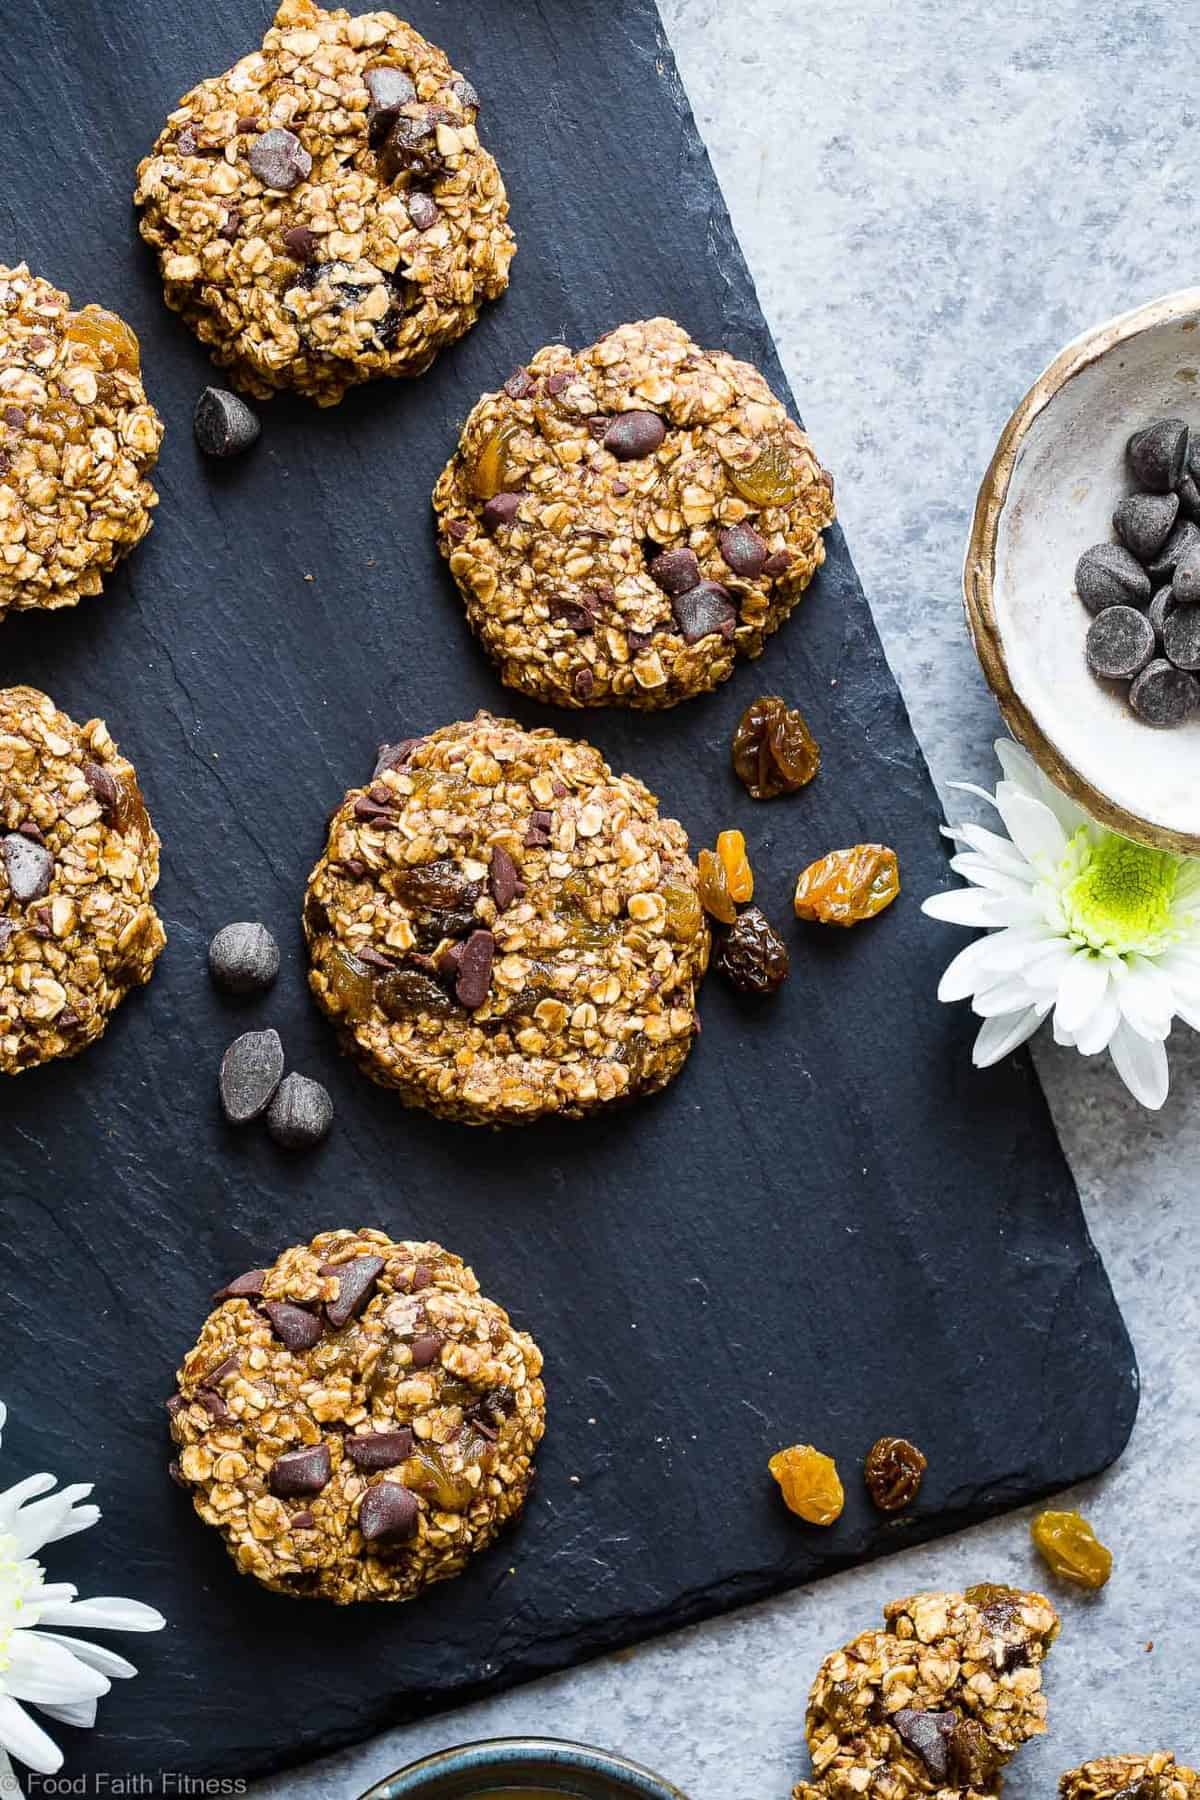 No-Bake Vegan Oatmeal Raisin, Chocolate Chip, and Tahini Cookies - These EASY, no bake oatmeal cookies have a surprise tahini twist, chocolate and notes of spicy cardamon and chewy golden raisins! A healthy, gluten/dairy/egg free treat for only 110 calories! | #Foodfaithfitness | #Vegan #NoBake #Healthy #ChocolateChip #Glutenfree